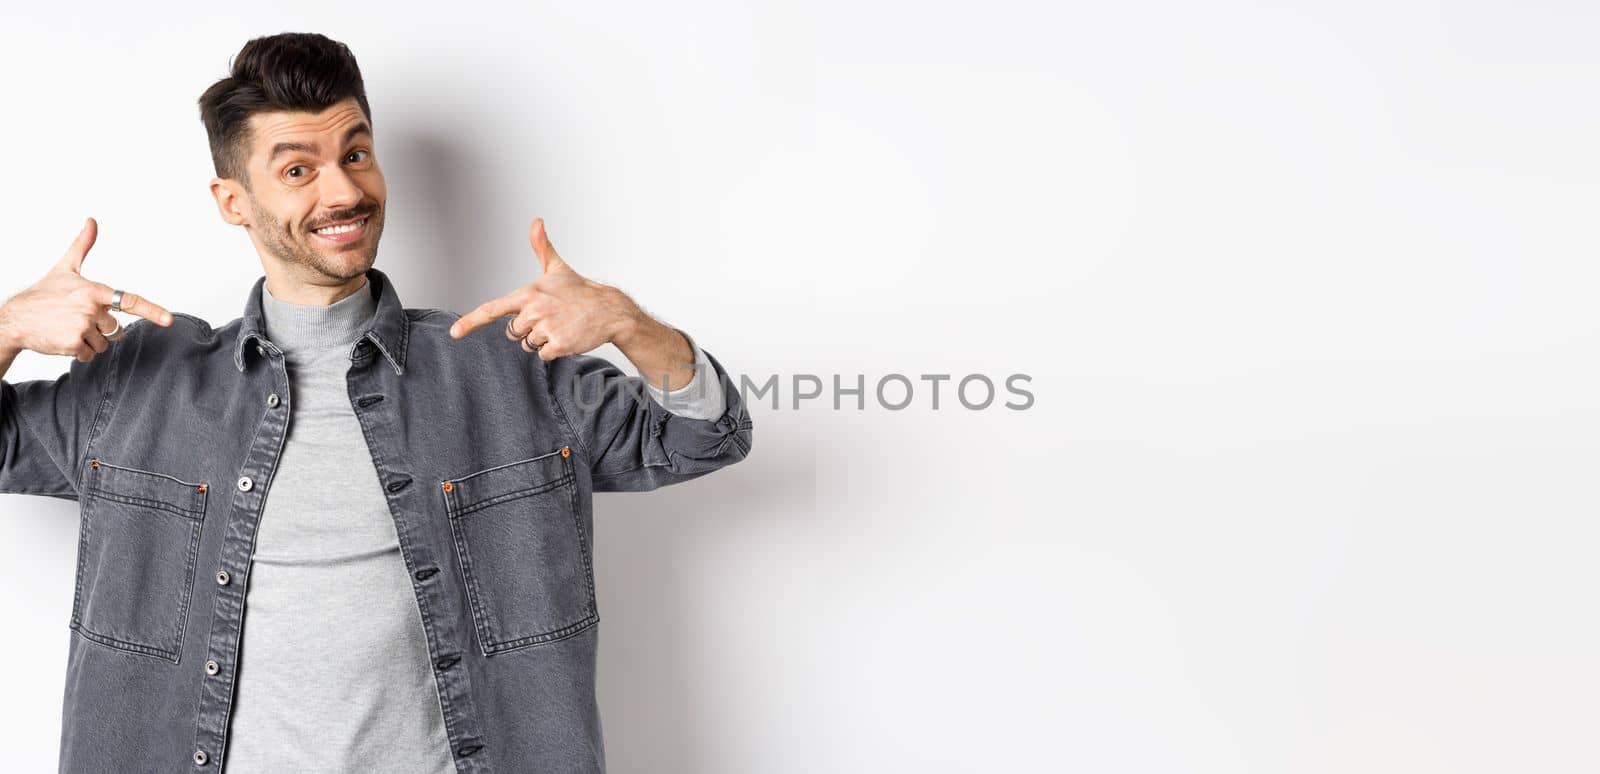 Handsome guy with moustache and white smile pointing fingers at center, showing company logo, standing on white background.